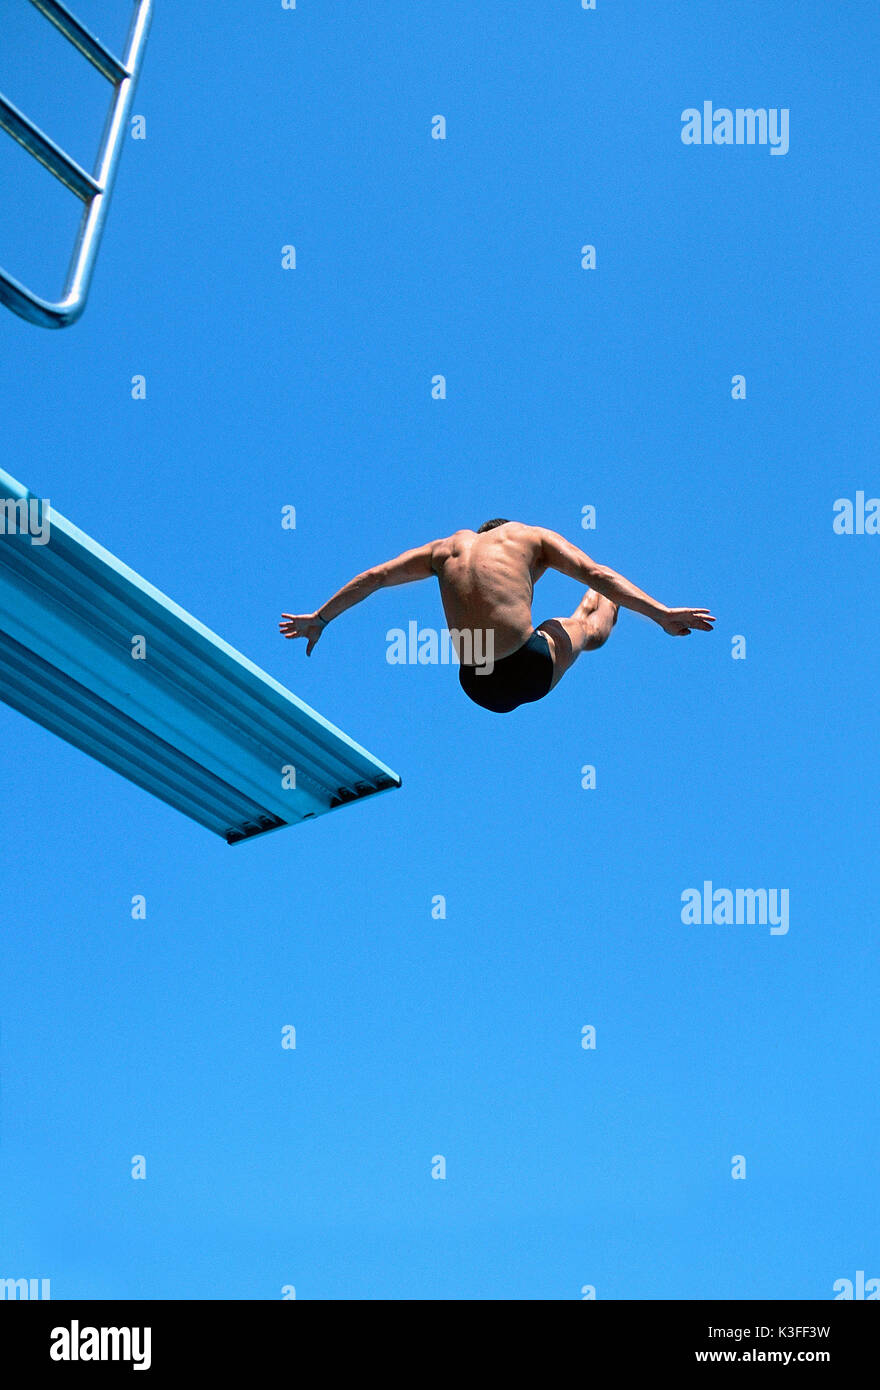 Tower jumper jumping of the springboard Stock Photo